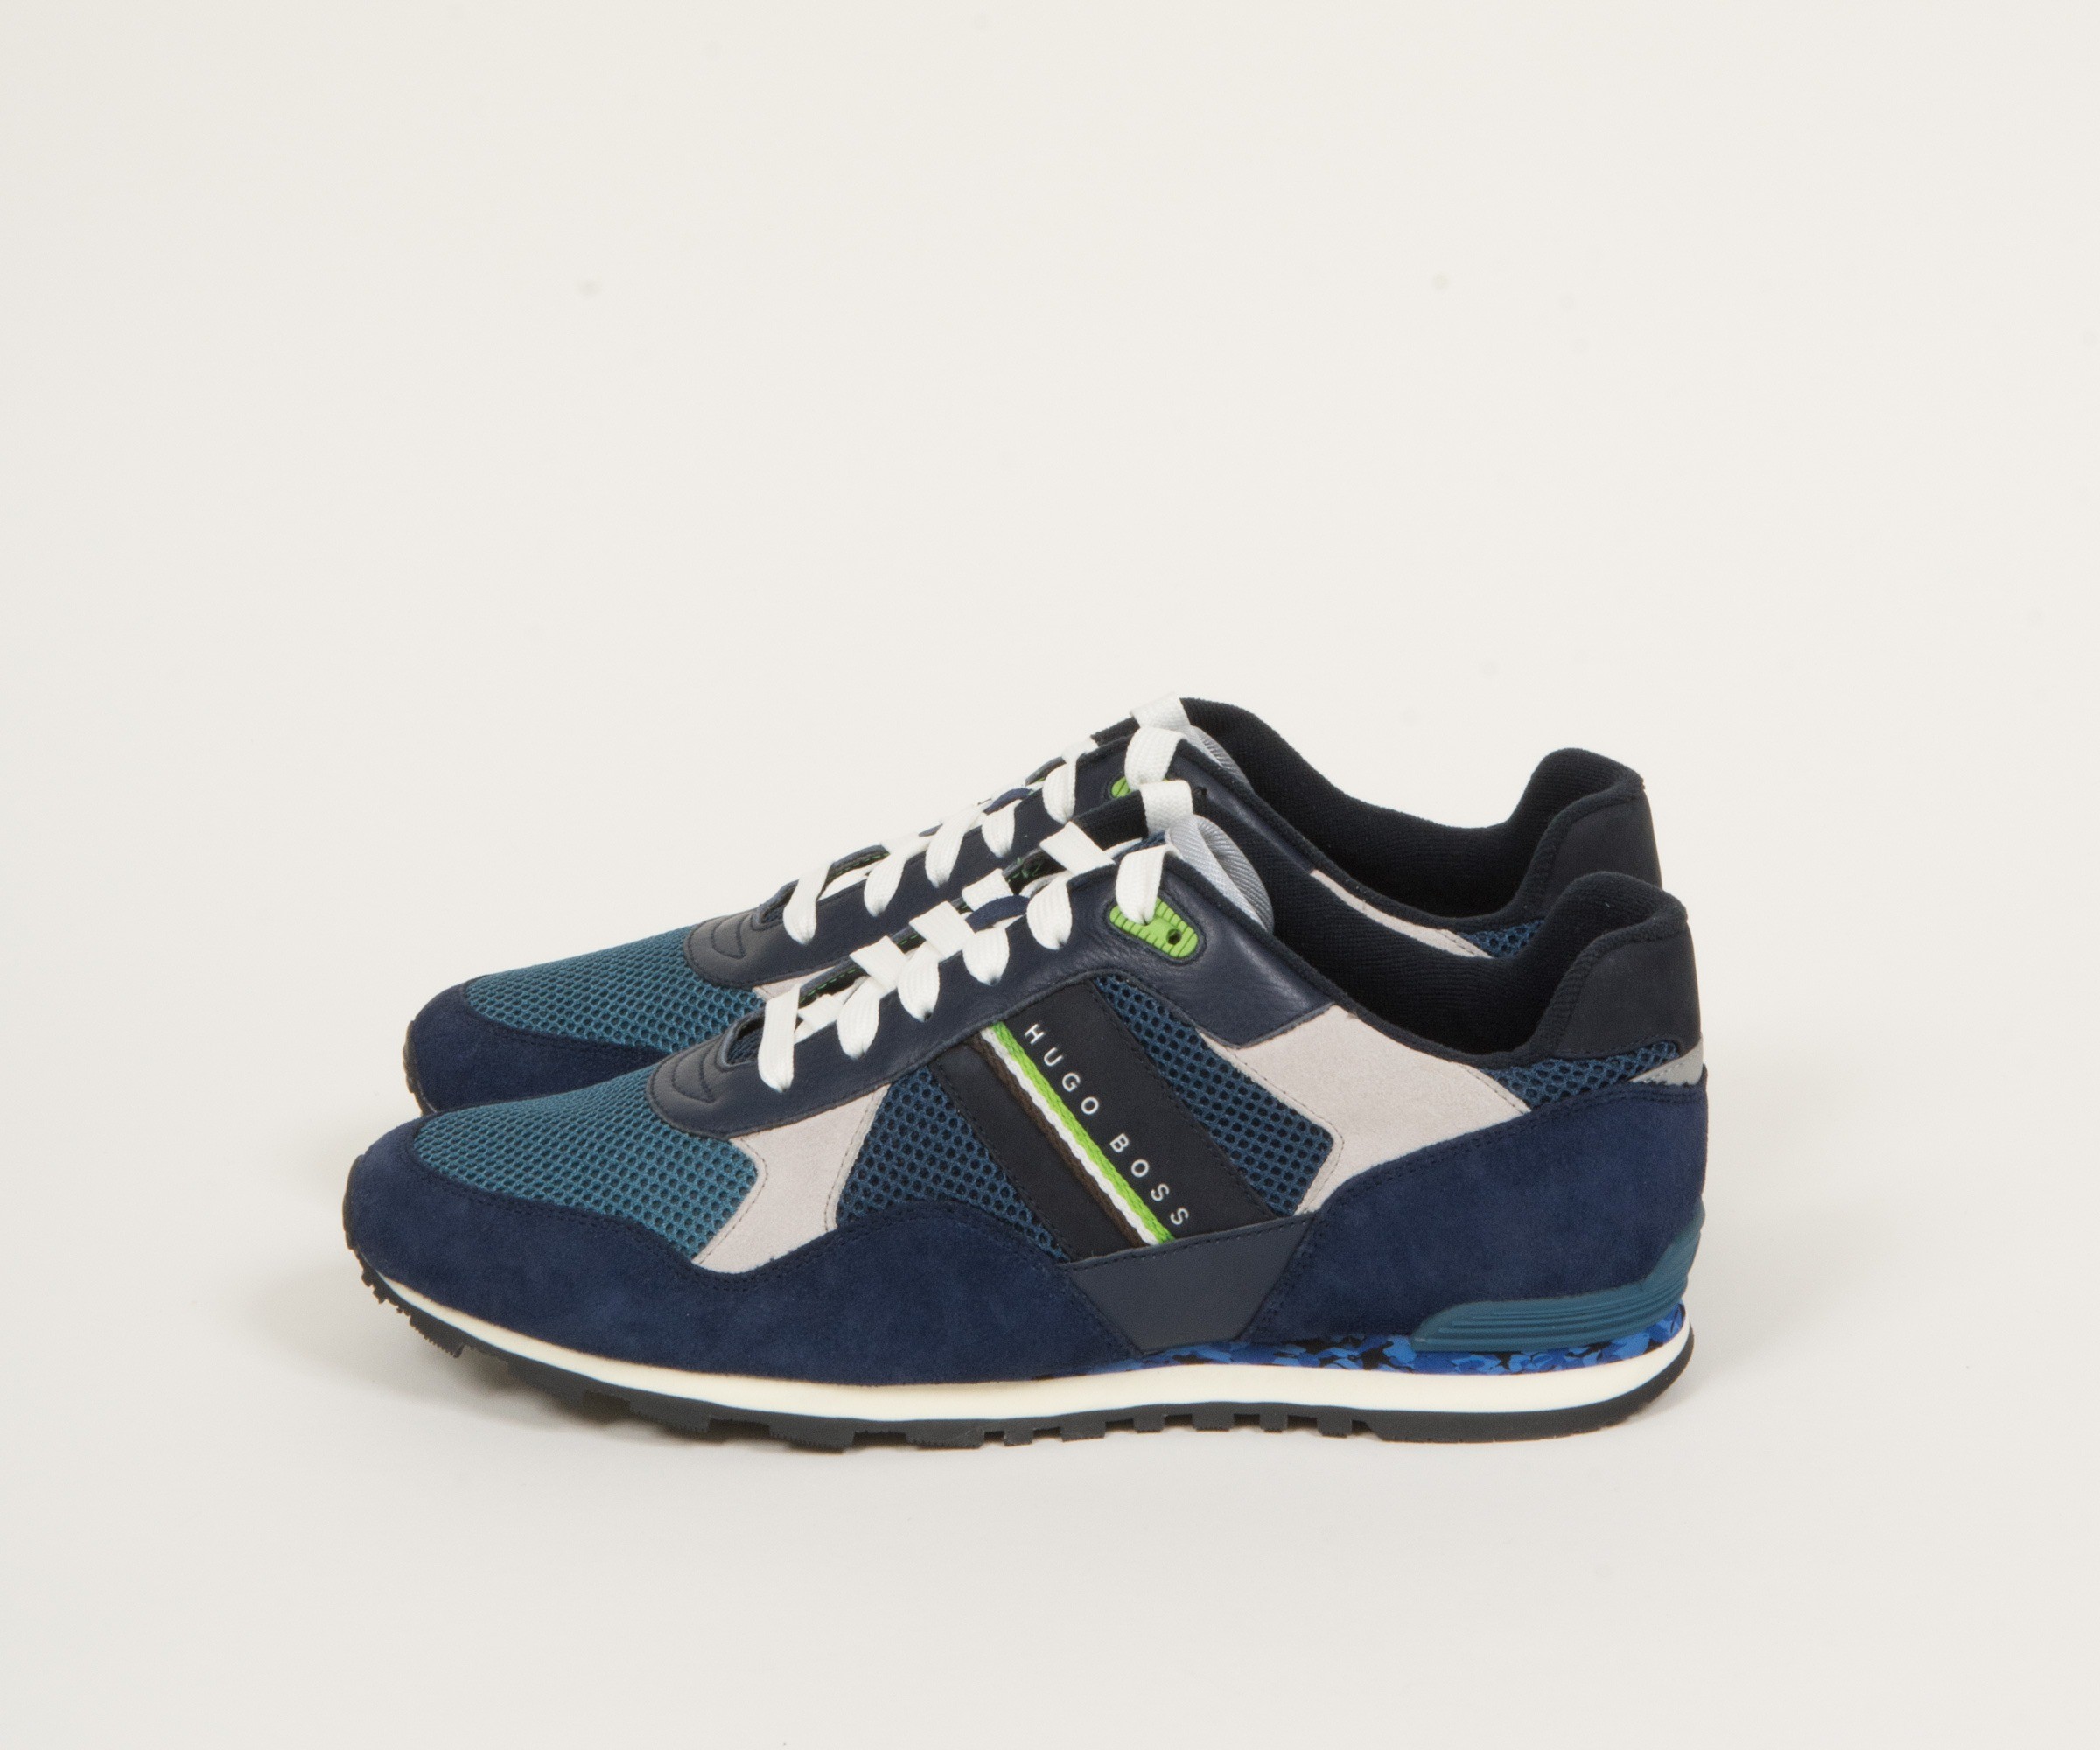 udredning mangel Manchuriet Hugo Boss Green Runcool Camo Trainer With Suede and Mesh Detail Blue and  Navy